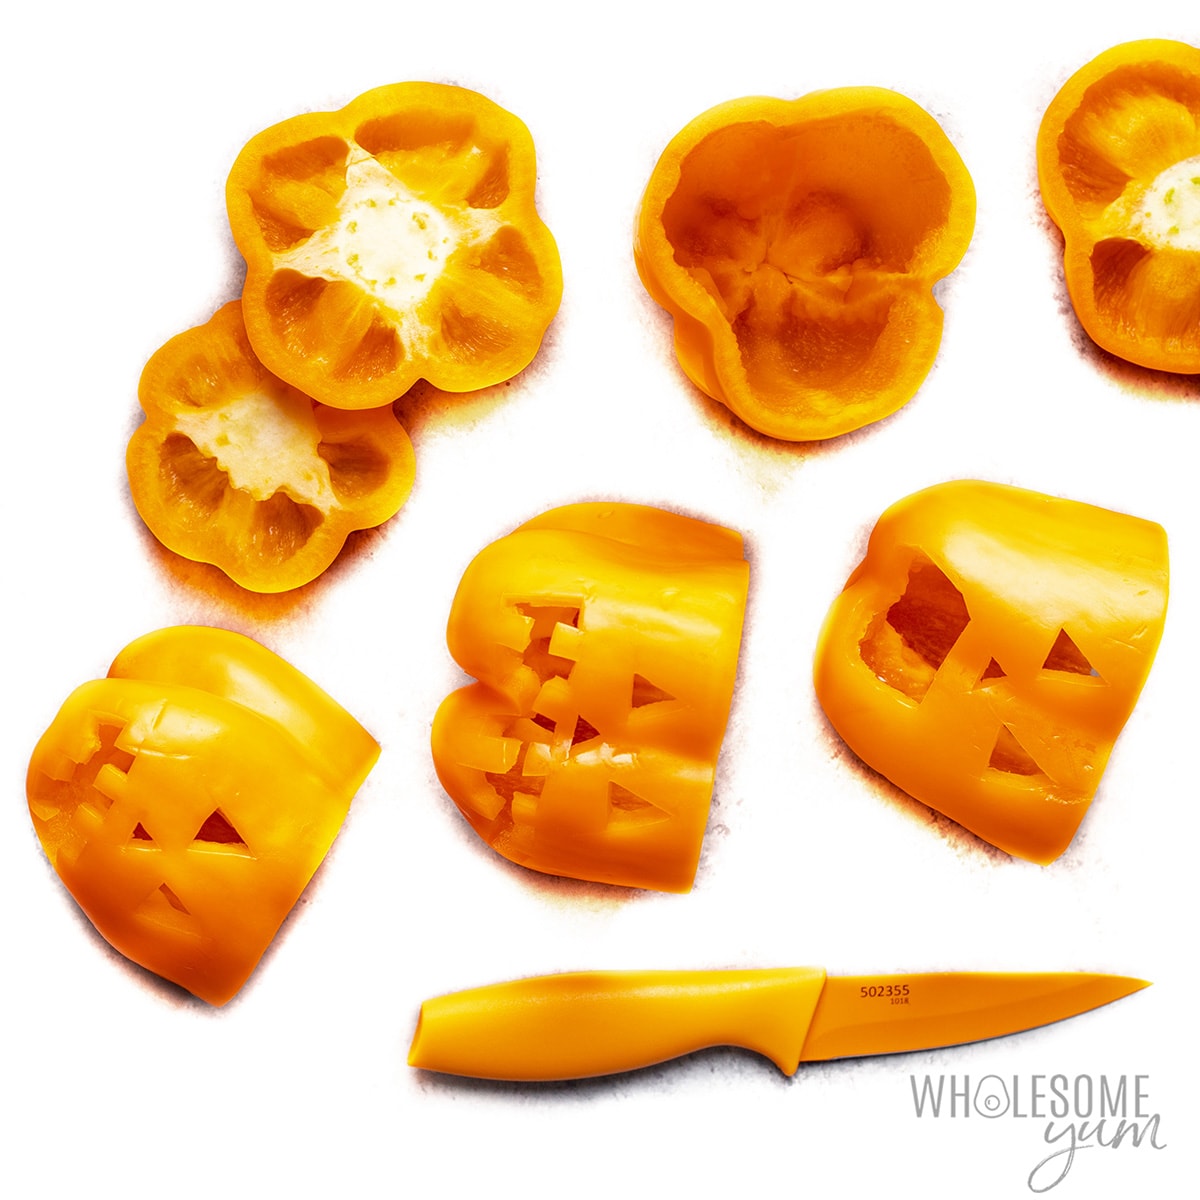 Orange bell peppers with jack-o-lantern faces cut out.